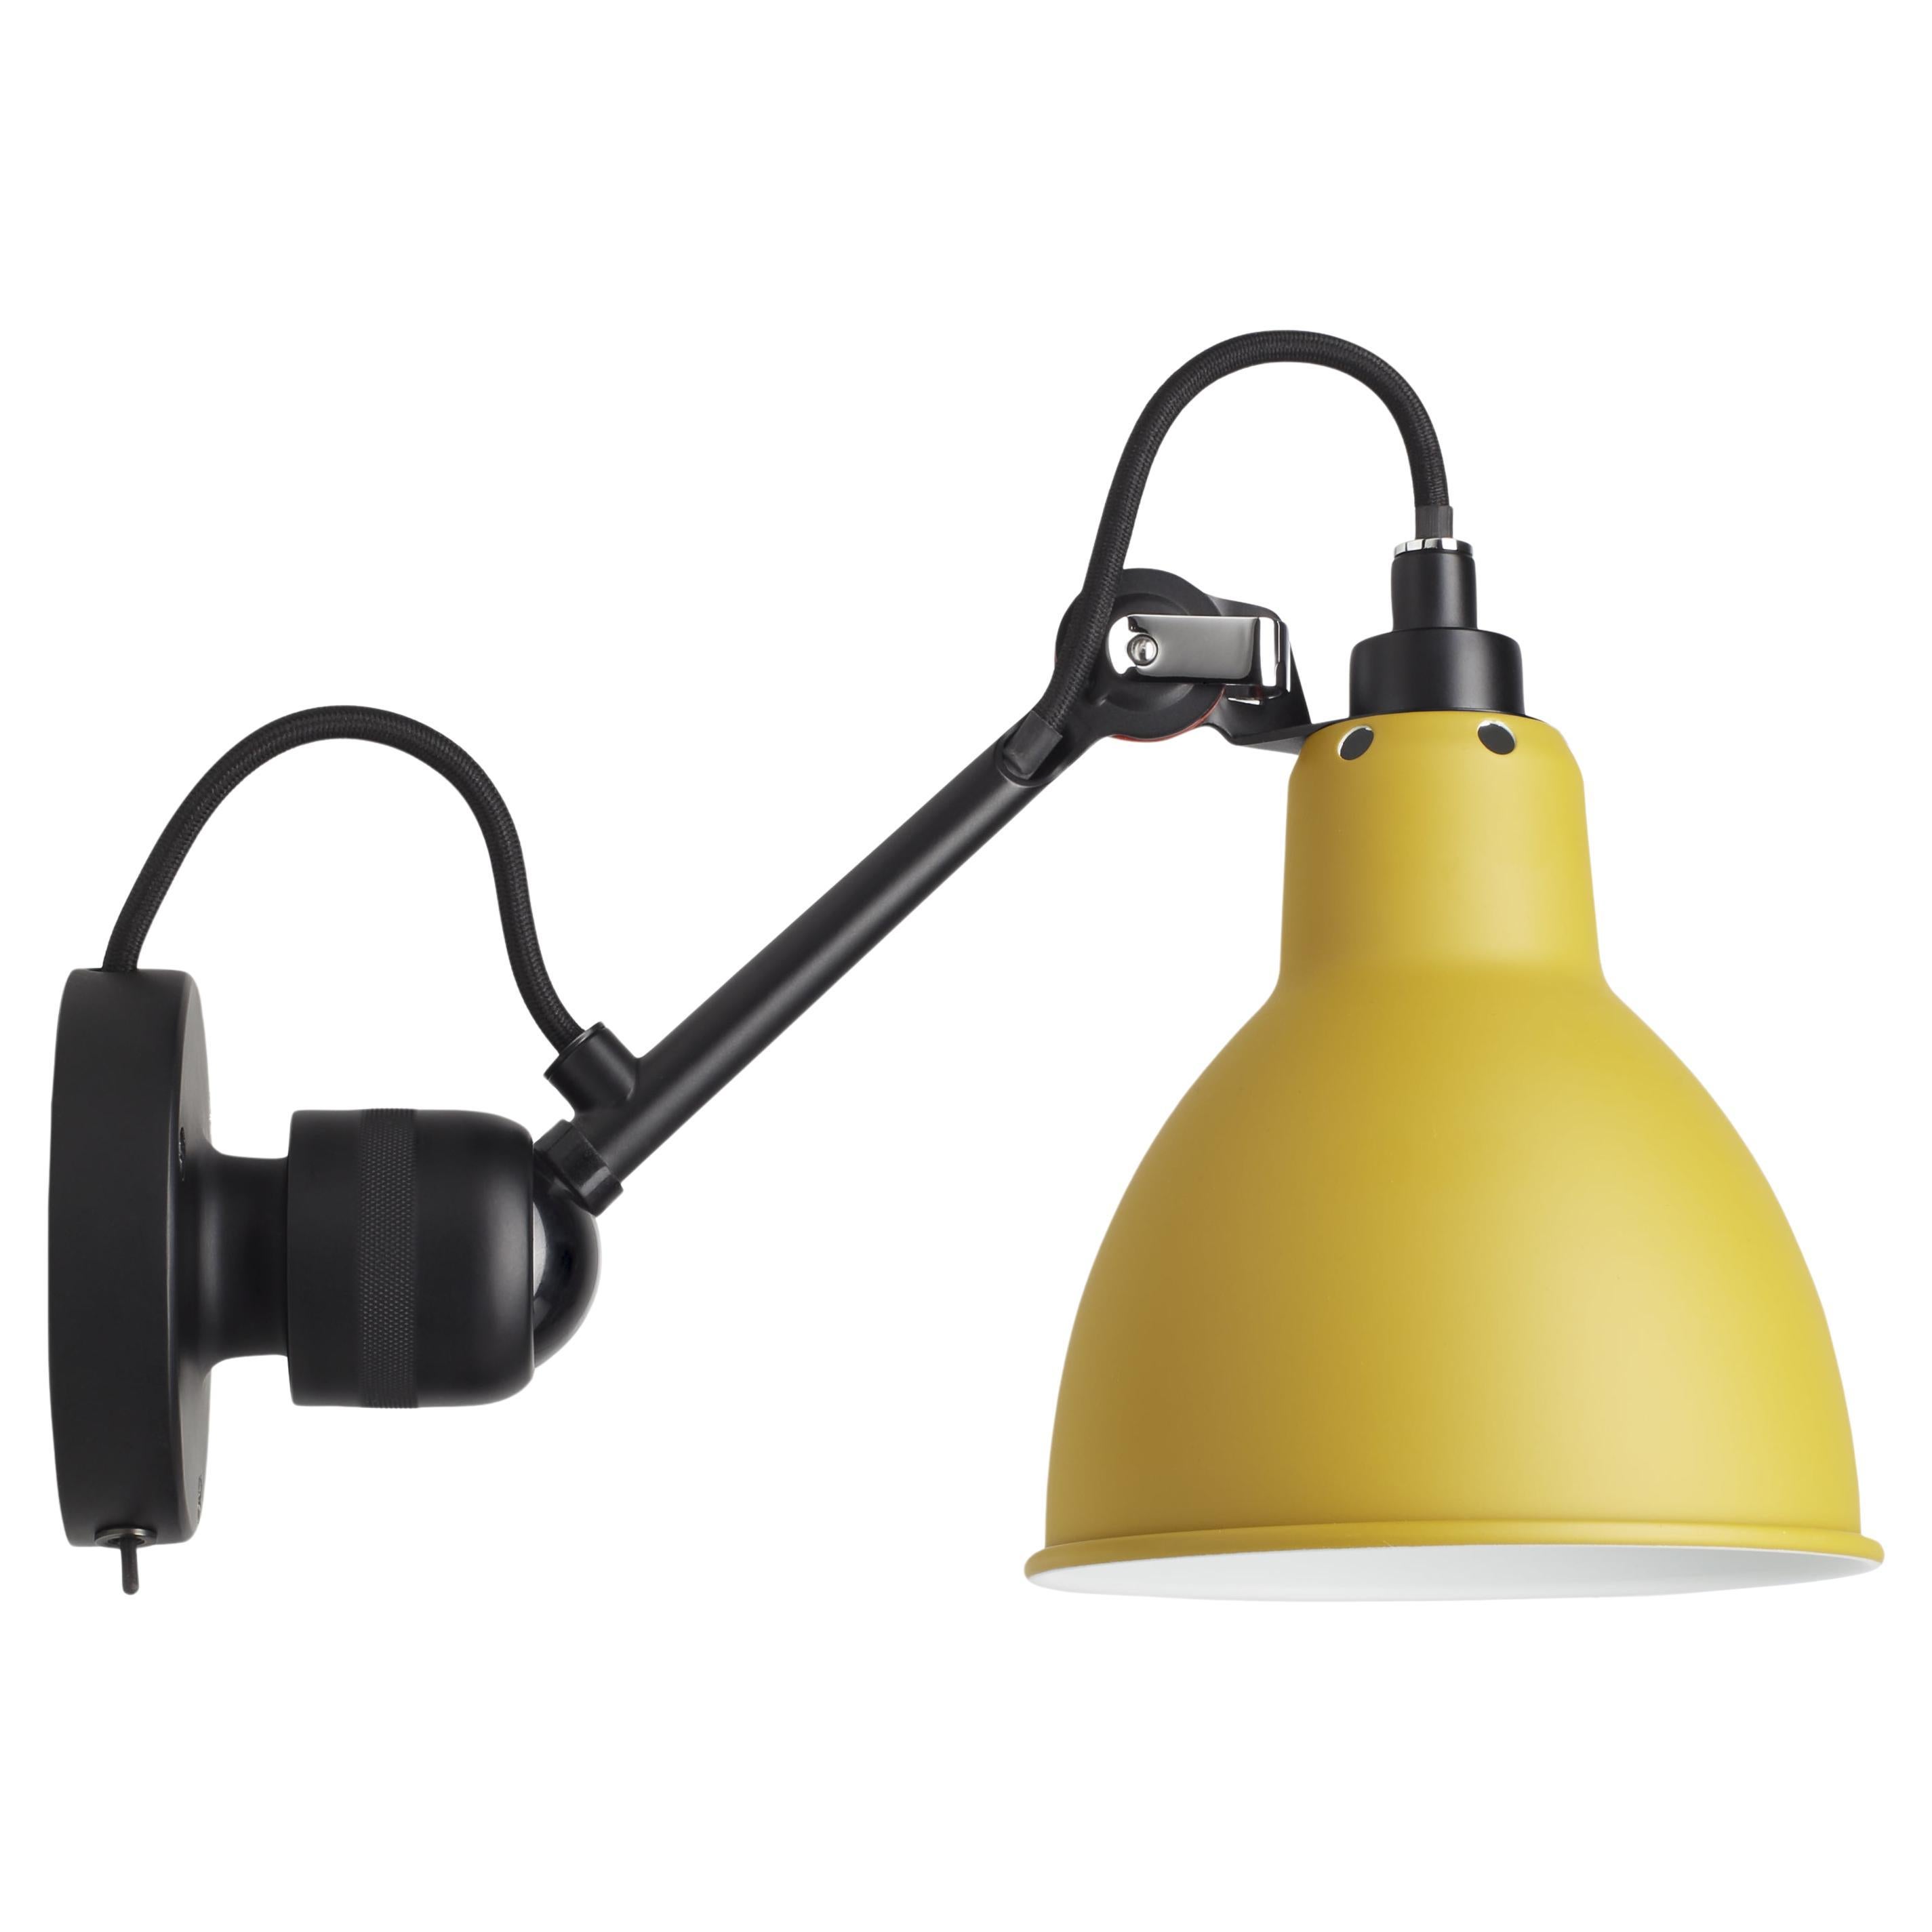 DCW Editions La Lampe Gras N°304 SW Wall Lamp in Black Arm and Yellow Shade For Sale